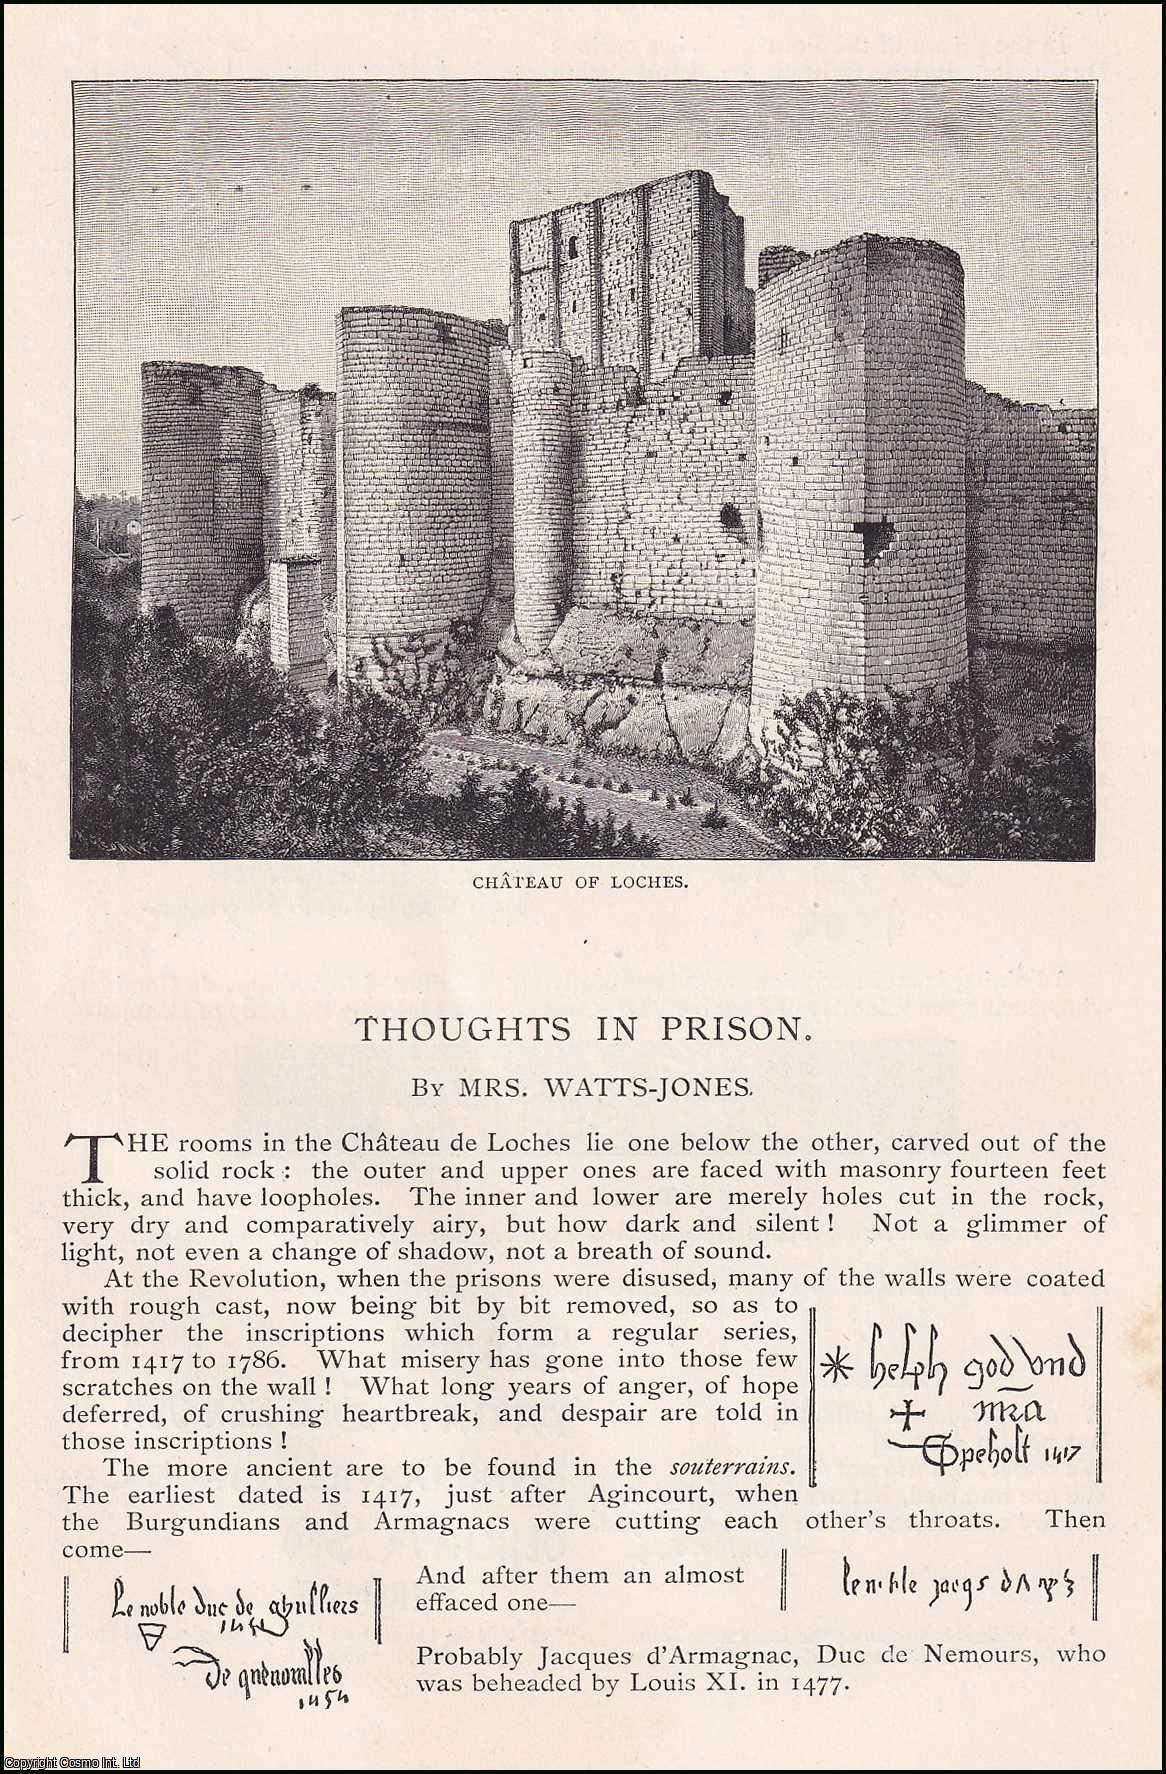 Mrs Watts-Jones - Thoughts in Prison; Inscriptions Uncovered at the Chateau de Loches Dating from 1417 to 1786. An original article from the English Illustrated Magazine, 1891.